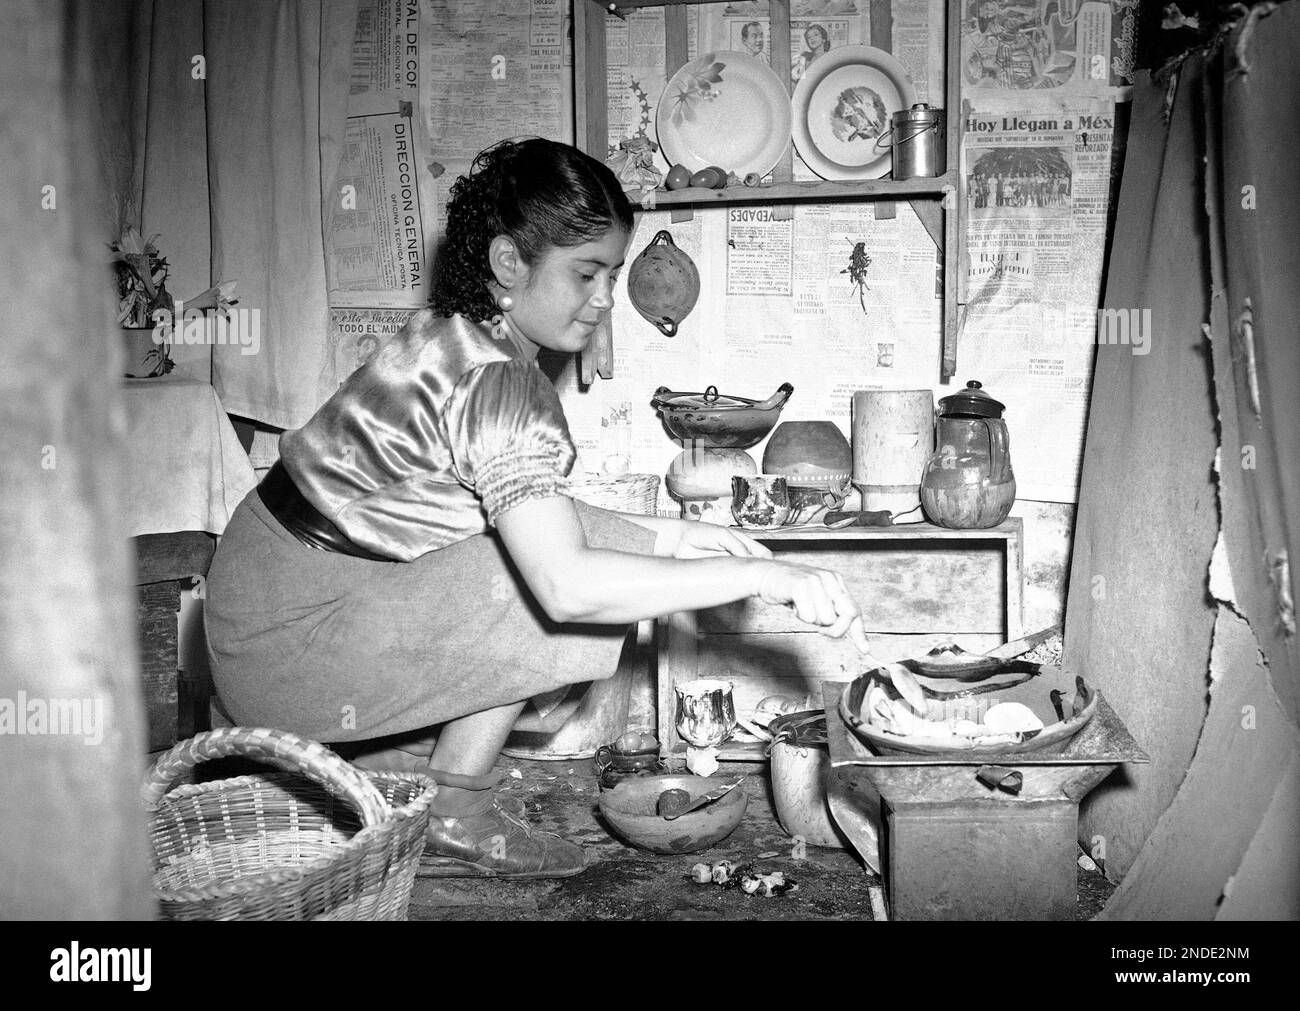 A Mexican soldier’s wife cooking in a military camp in Mexico on May 10, 1941. (AP Photo/Julio Leon) Stock Photo